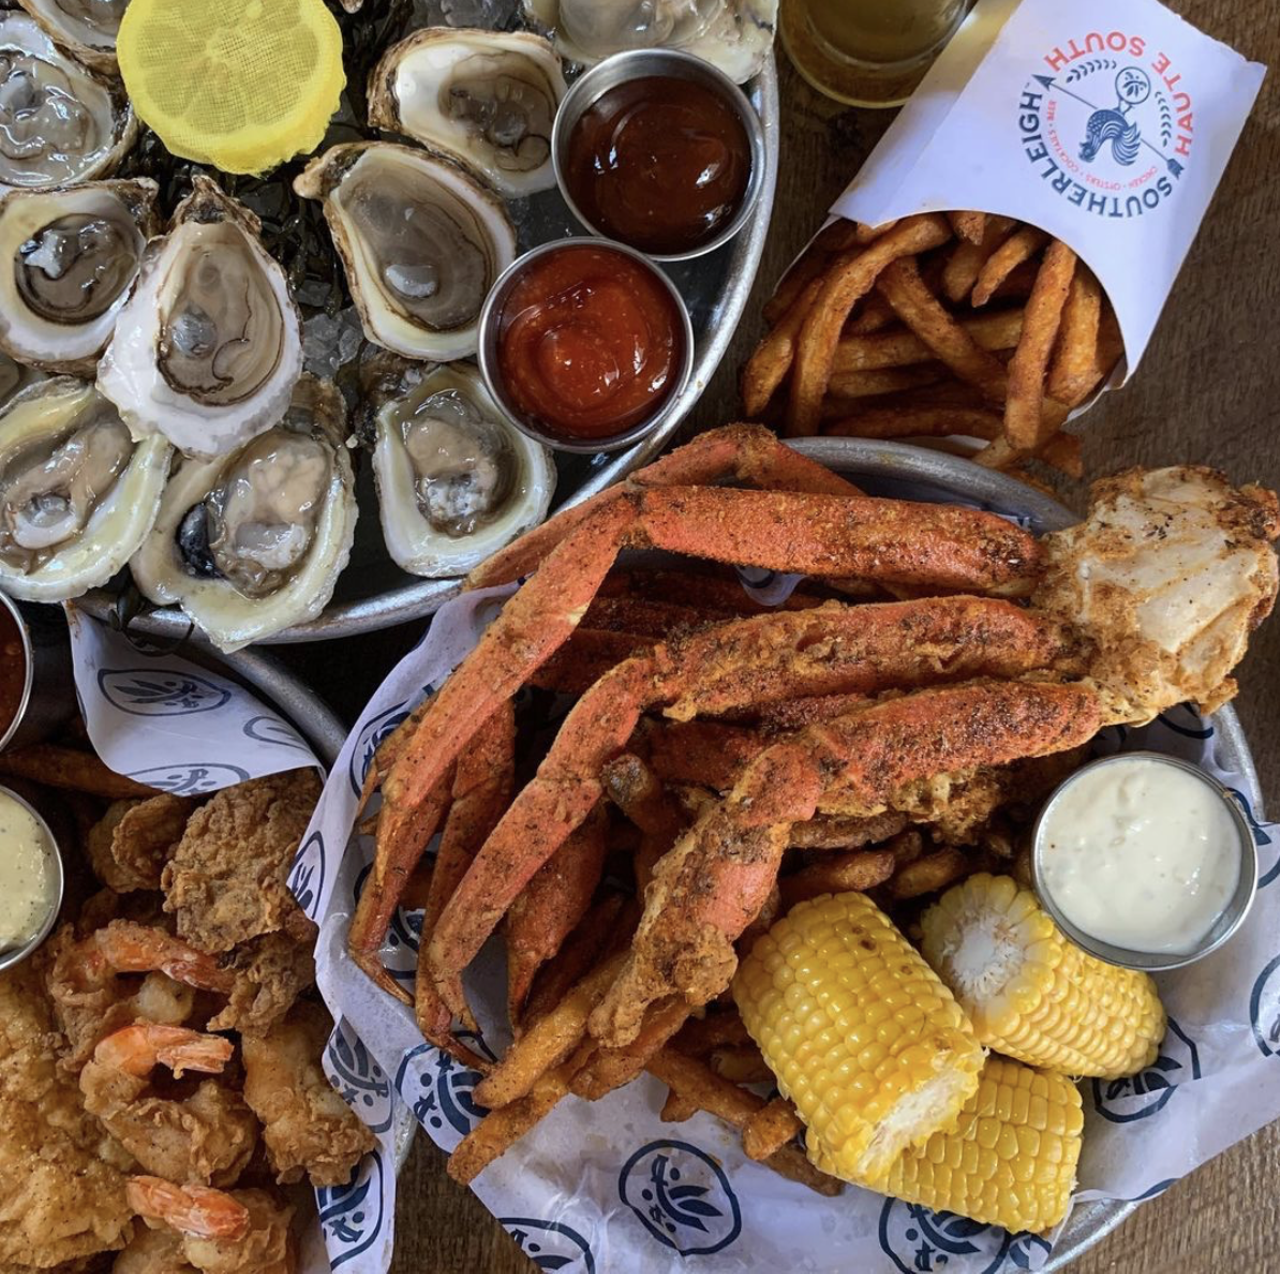 Southerleigh Haute South
5822 Worth Pkwy Unit 112, (210) 236-8556,  southerleighhautesouth.com
This new concept from the folks that brought you the aforementioned snapper throats, Southerleigh Haute South’s Southern-style menu includes a seafood and a full oyster bar.
Photo via Instagram / southerleighhautesouth